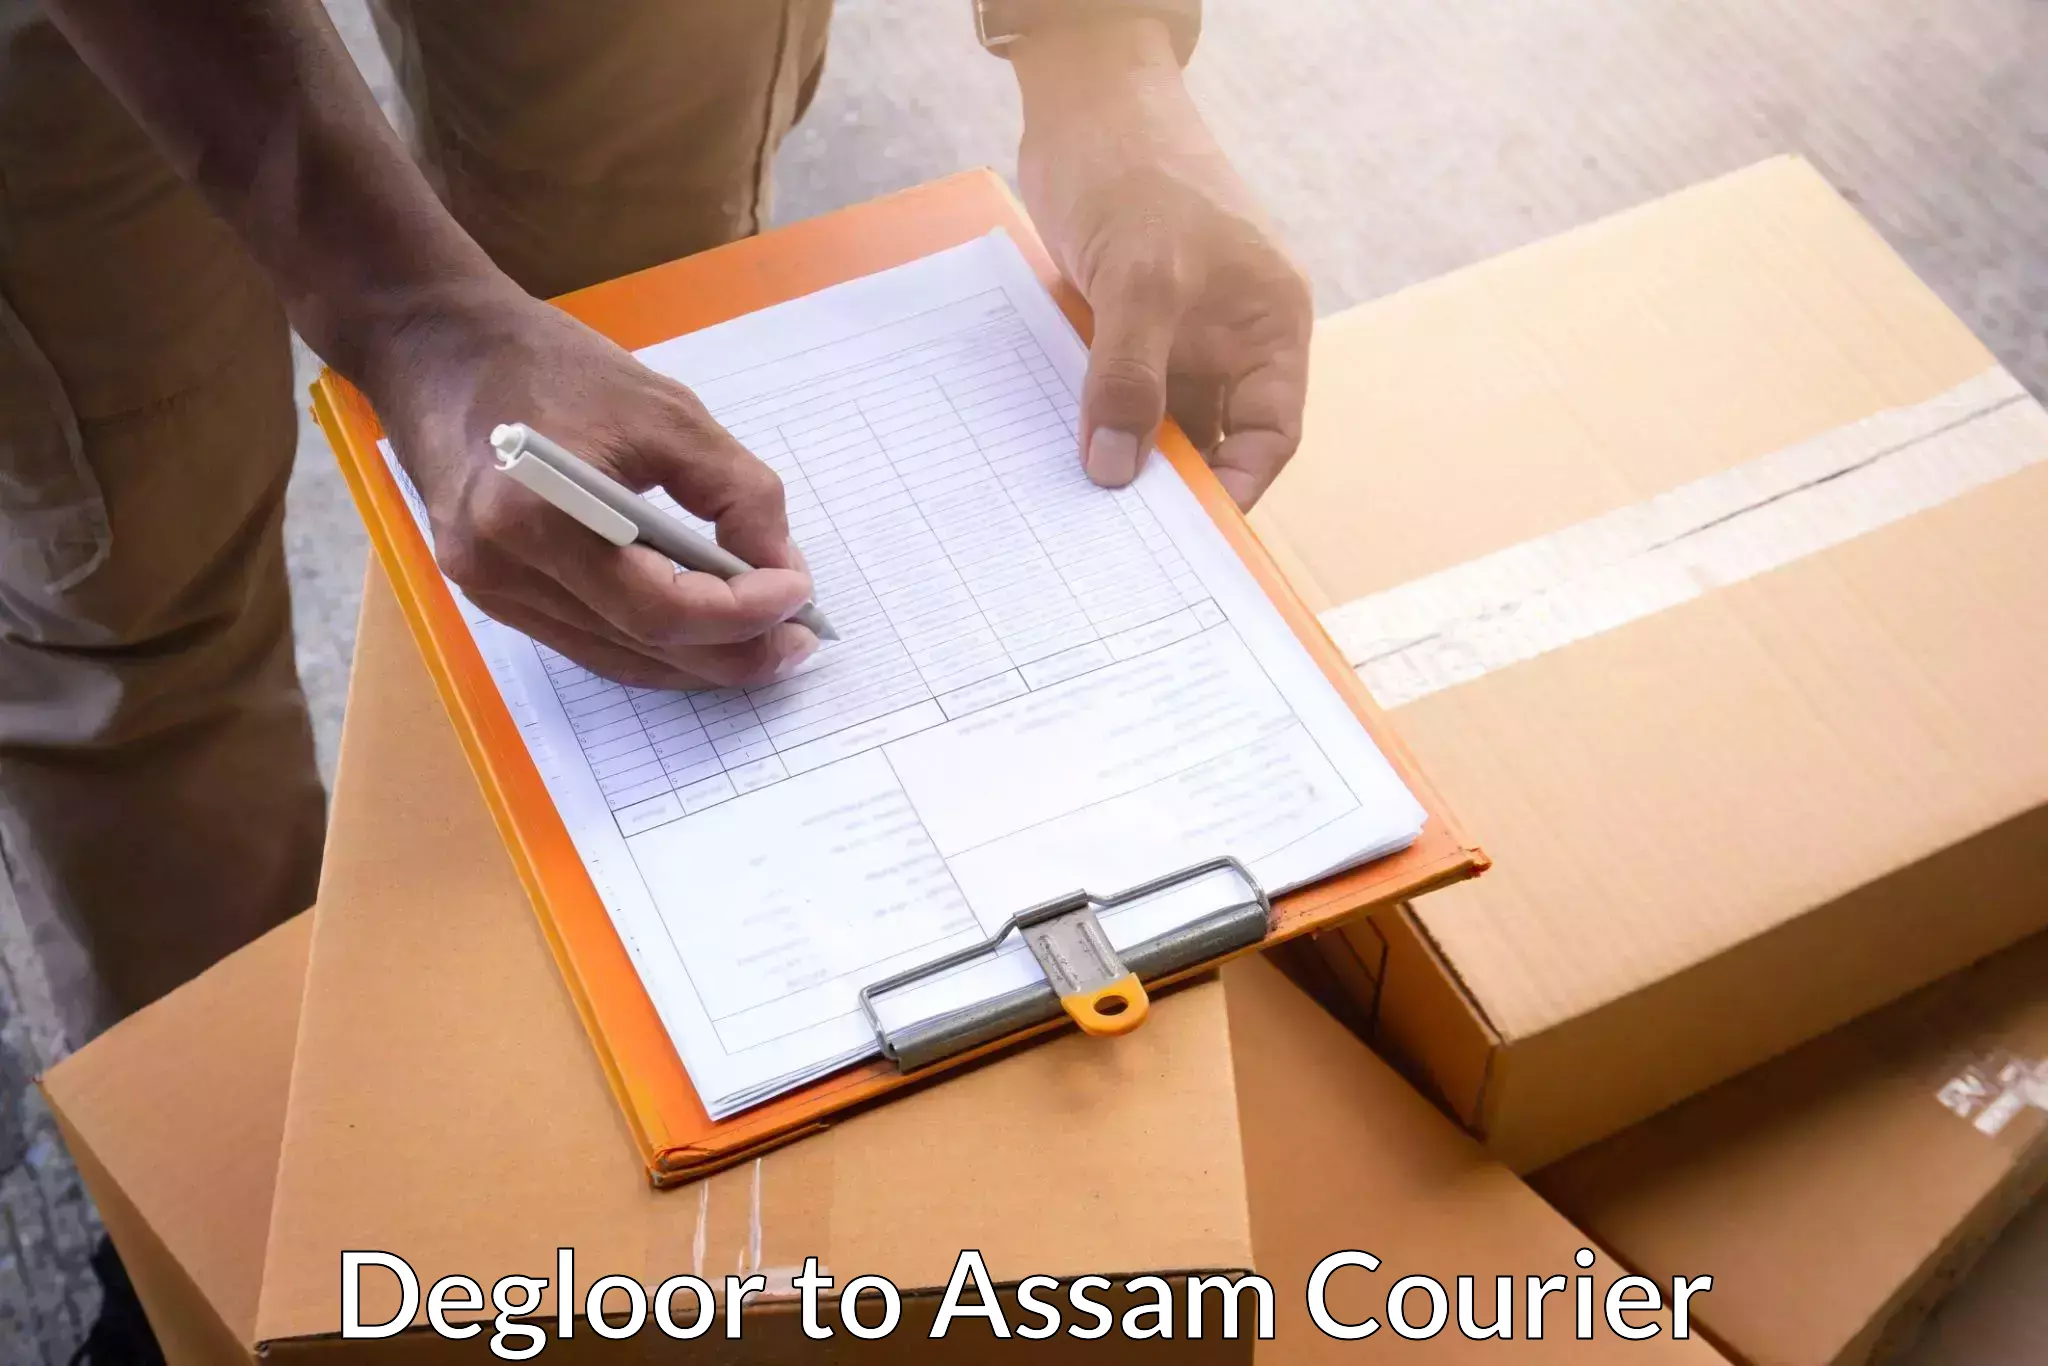 Advanced shipping network Degloor to Assam